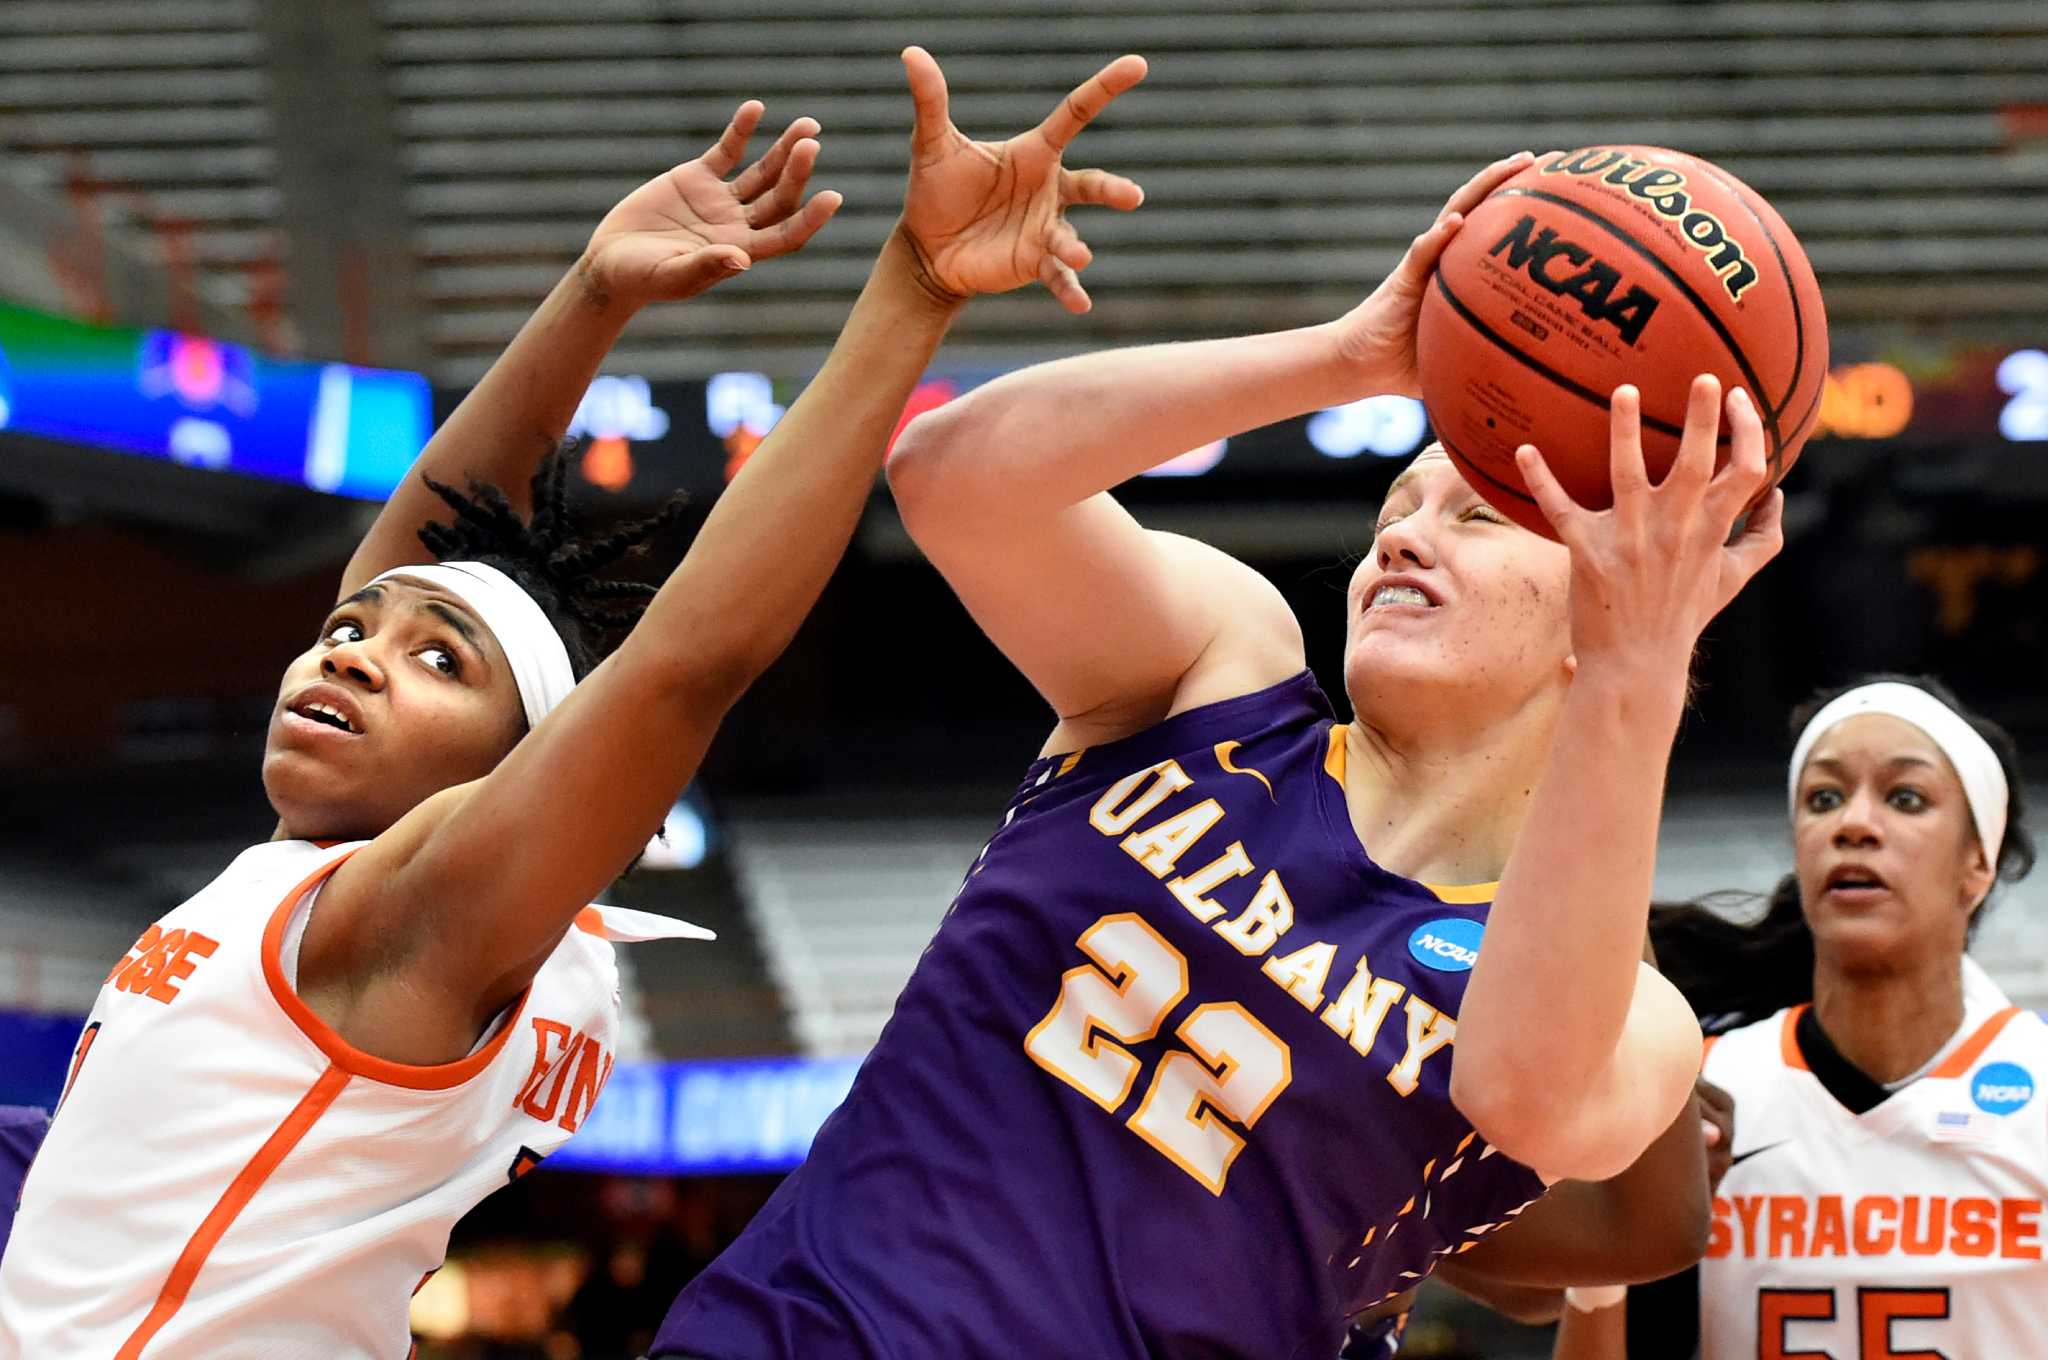 UAlbany women have no regrets after season ends in Syracuse